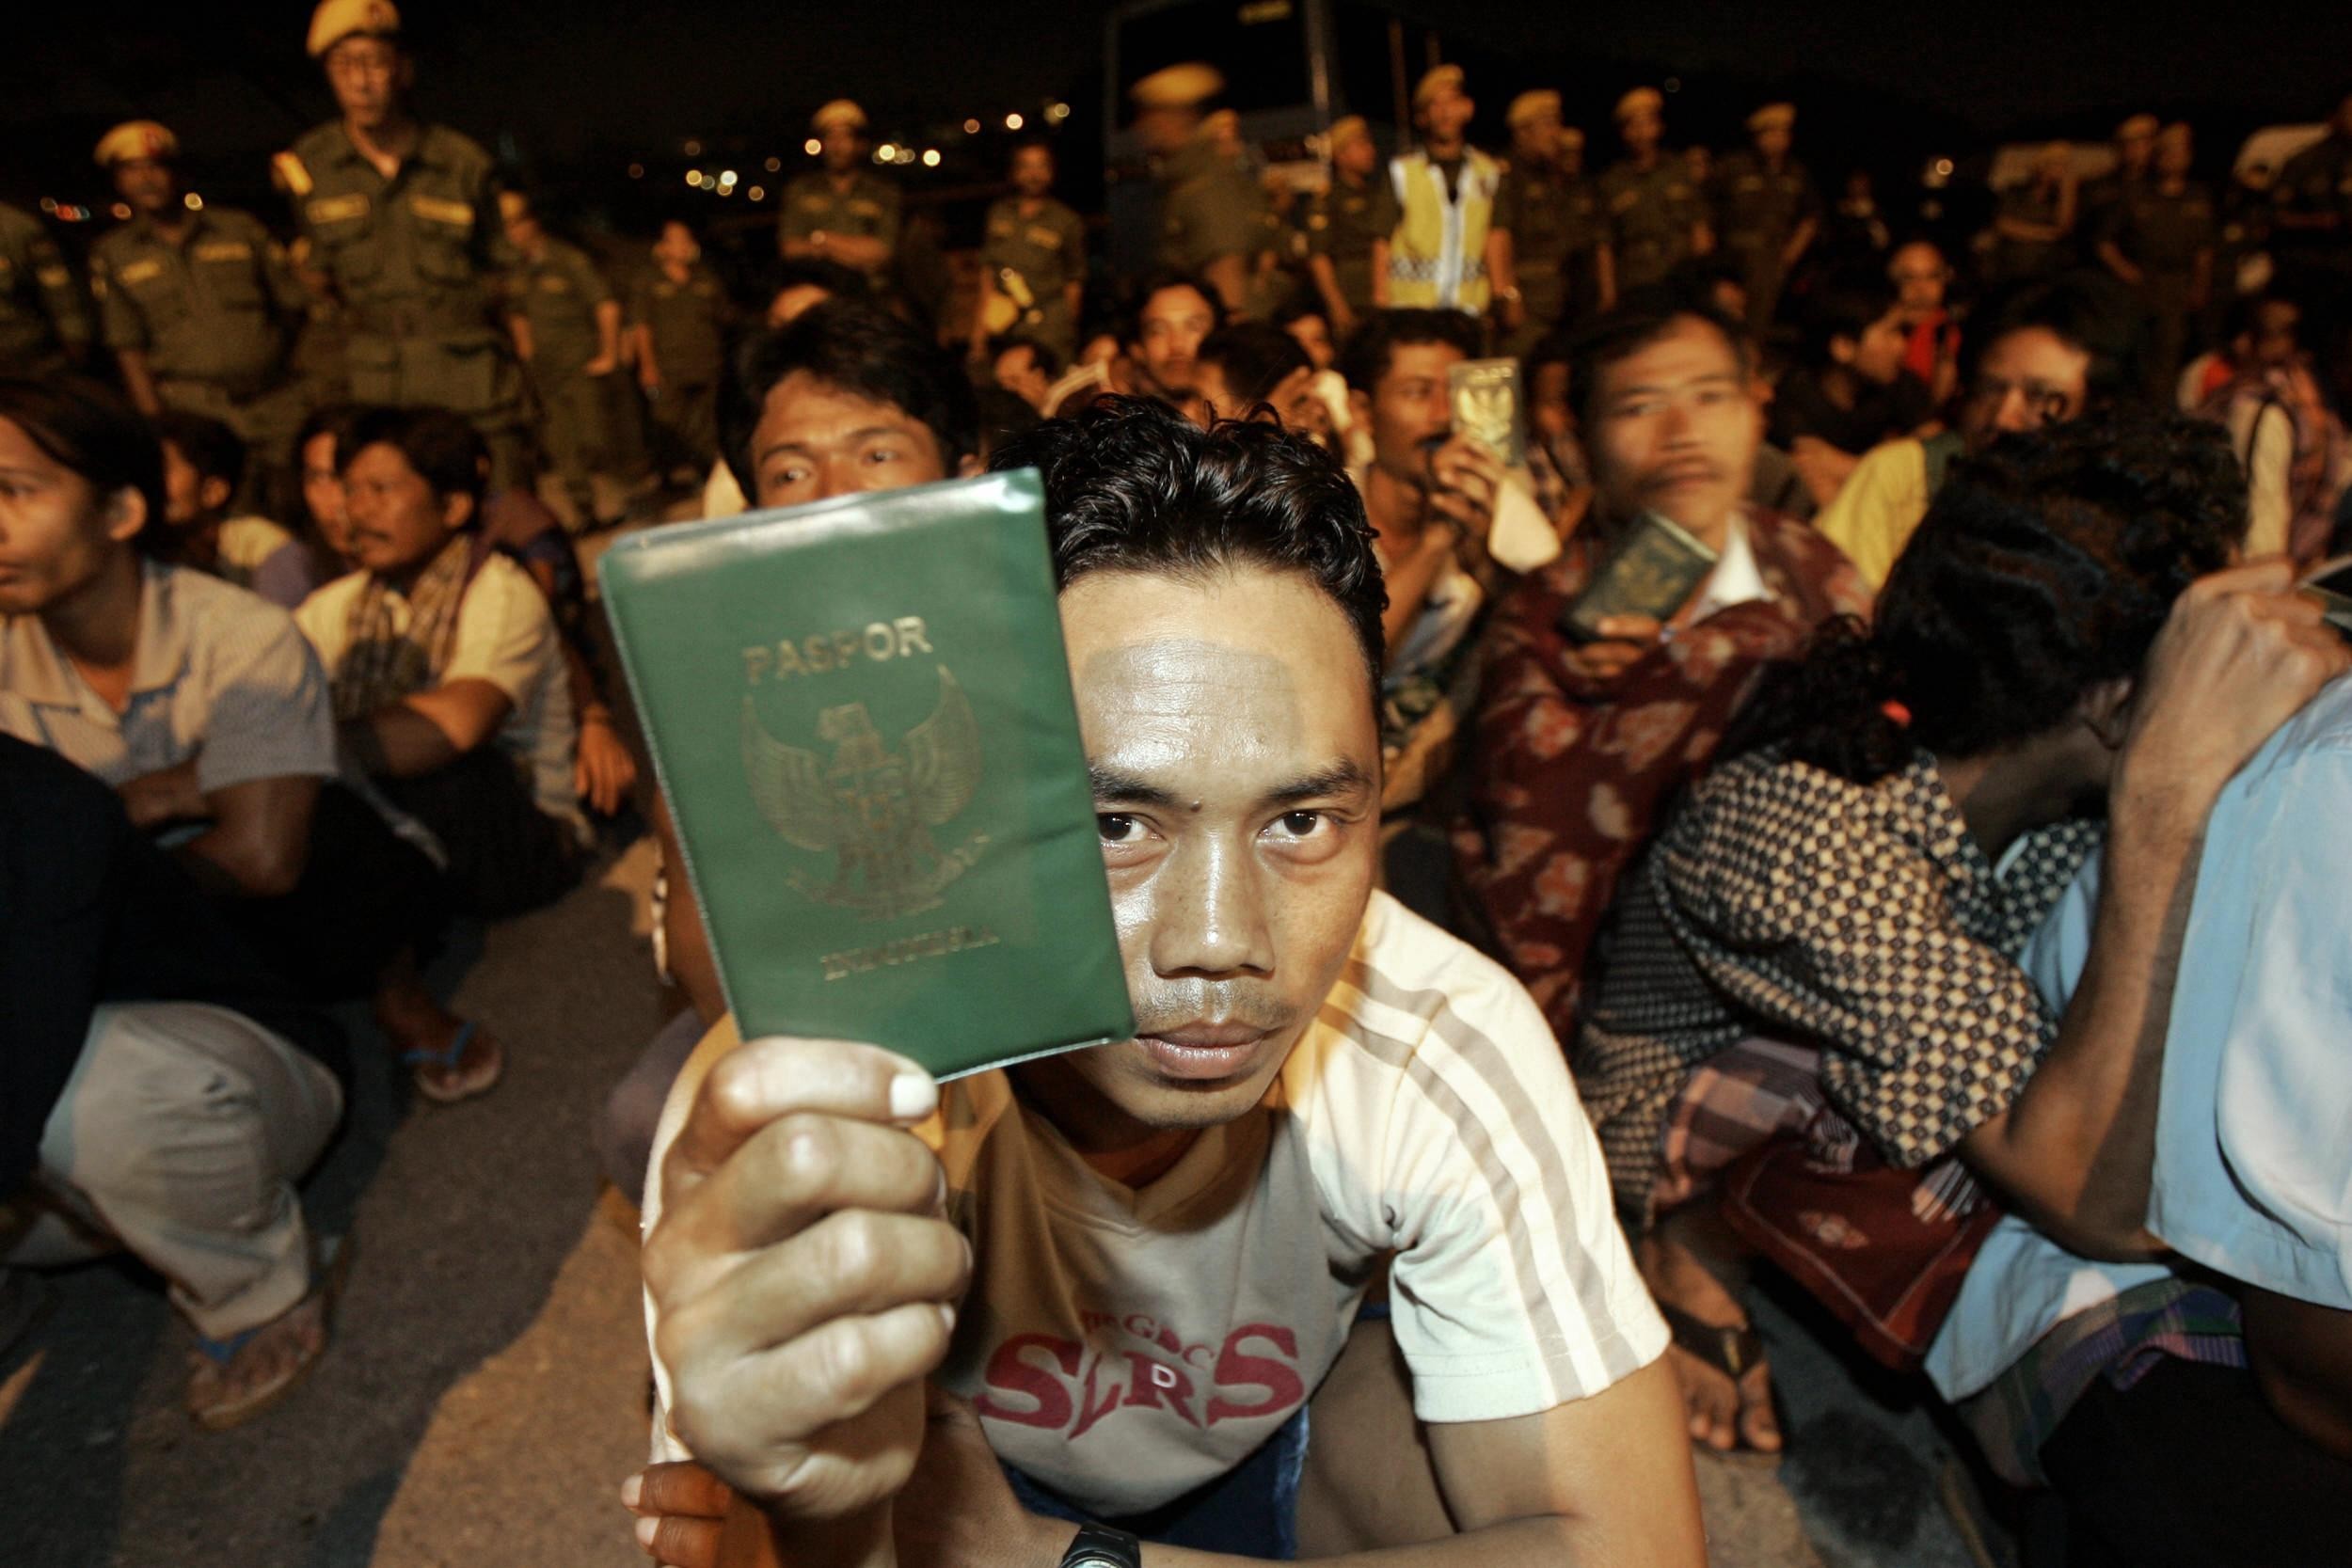 An Indonesian migrant worker in Kuala Lumpur shows his passport during a late-night immigration raid. Photo: AFP